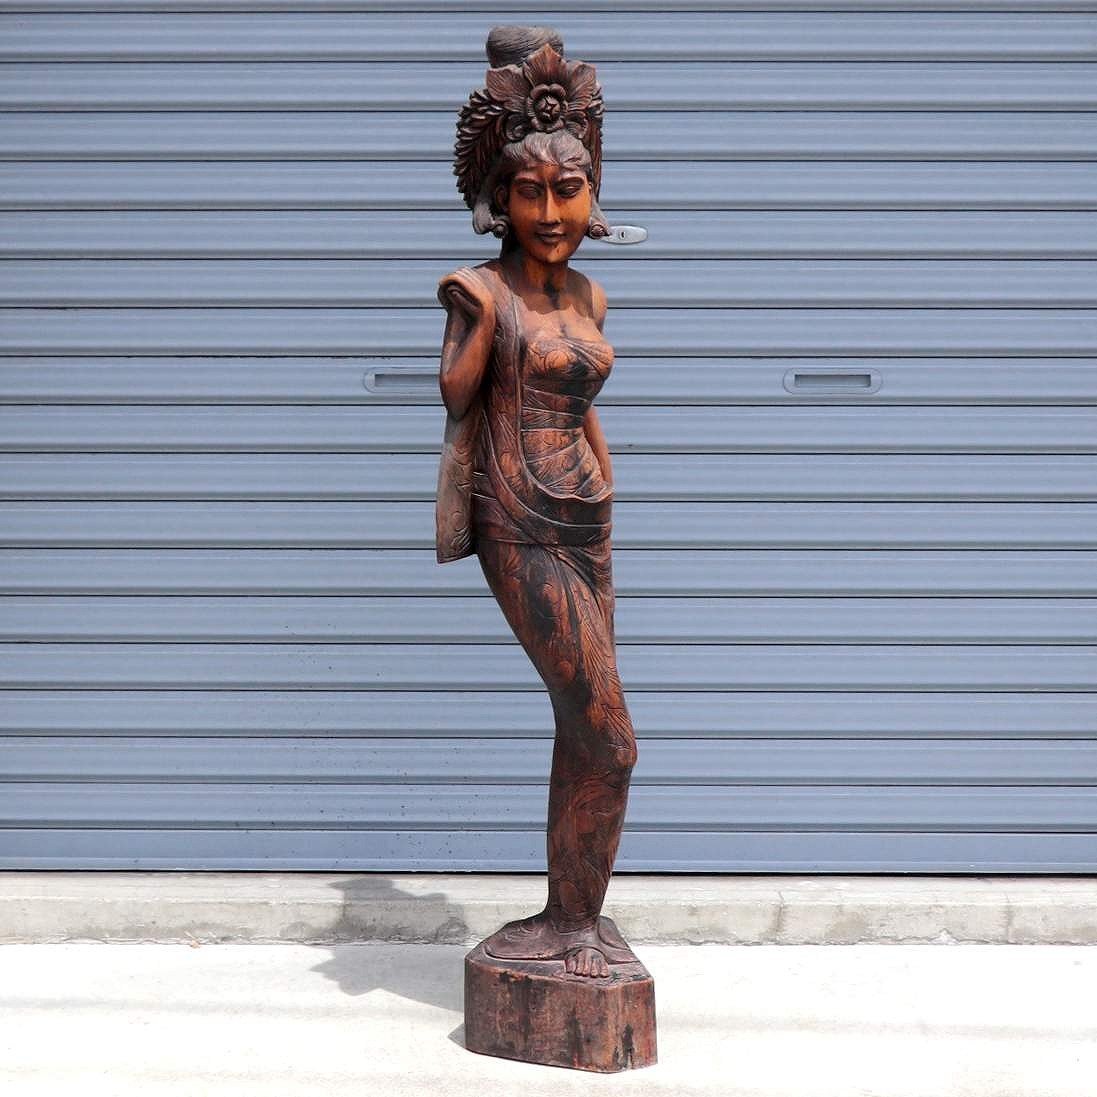 Bali/wood carving/female statue/No.200708-322/packing size 200, handmade works, interior, miscellaneous goods, ornament, object